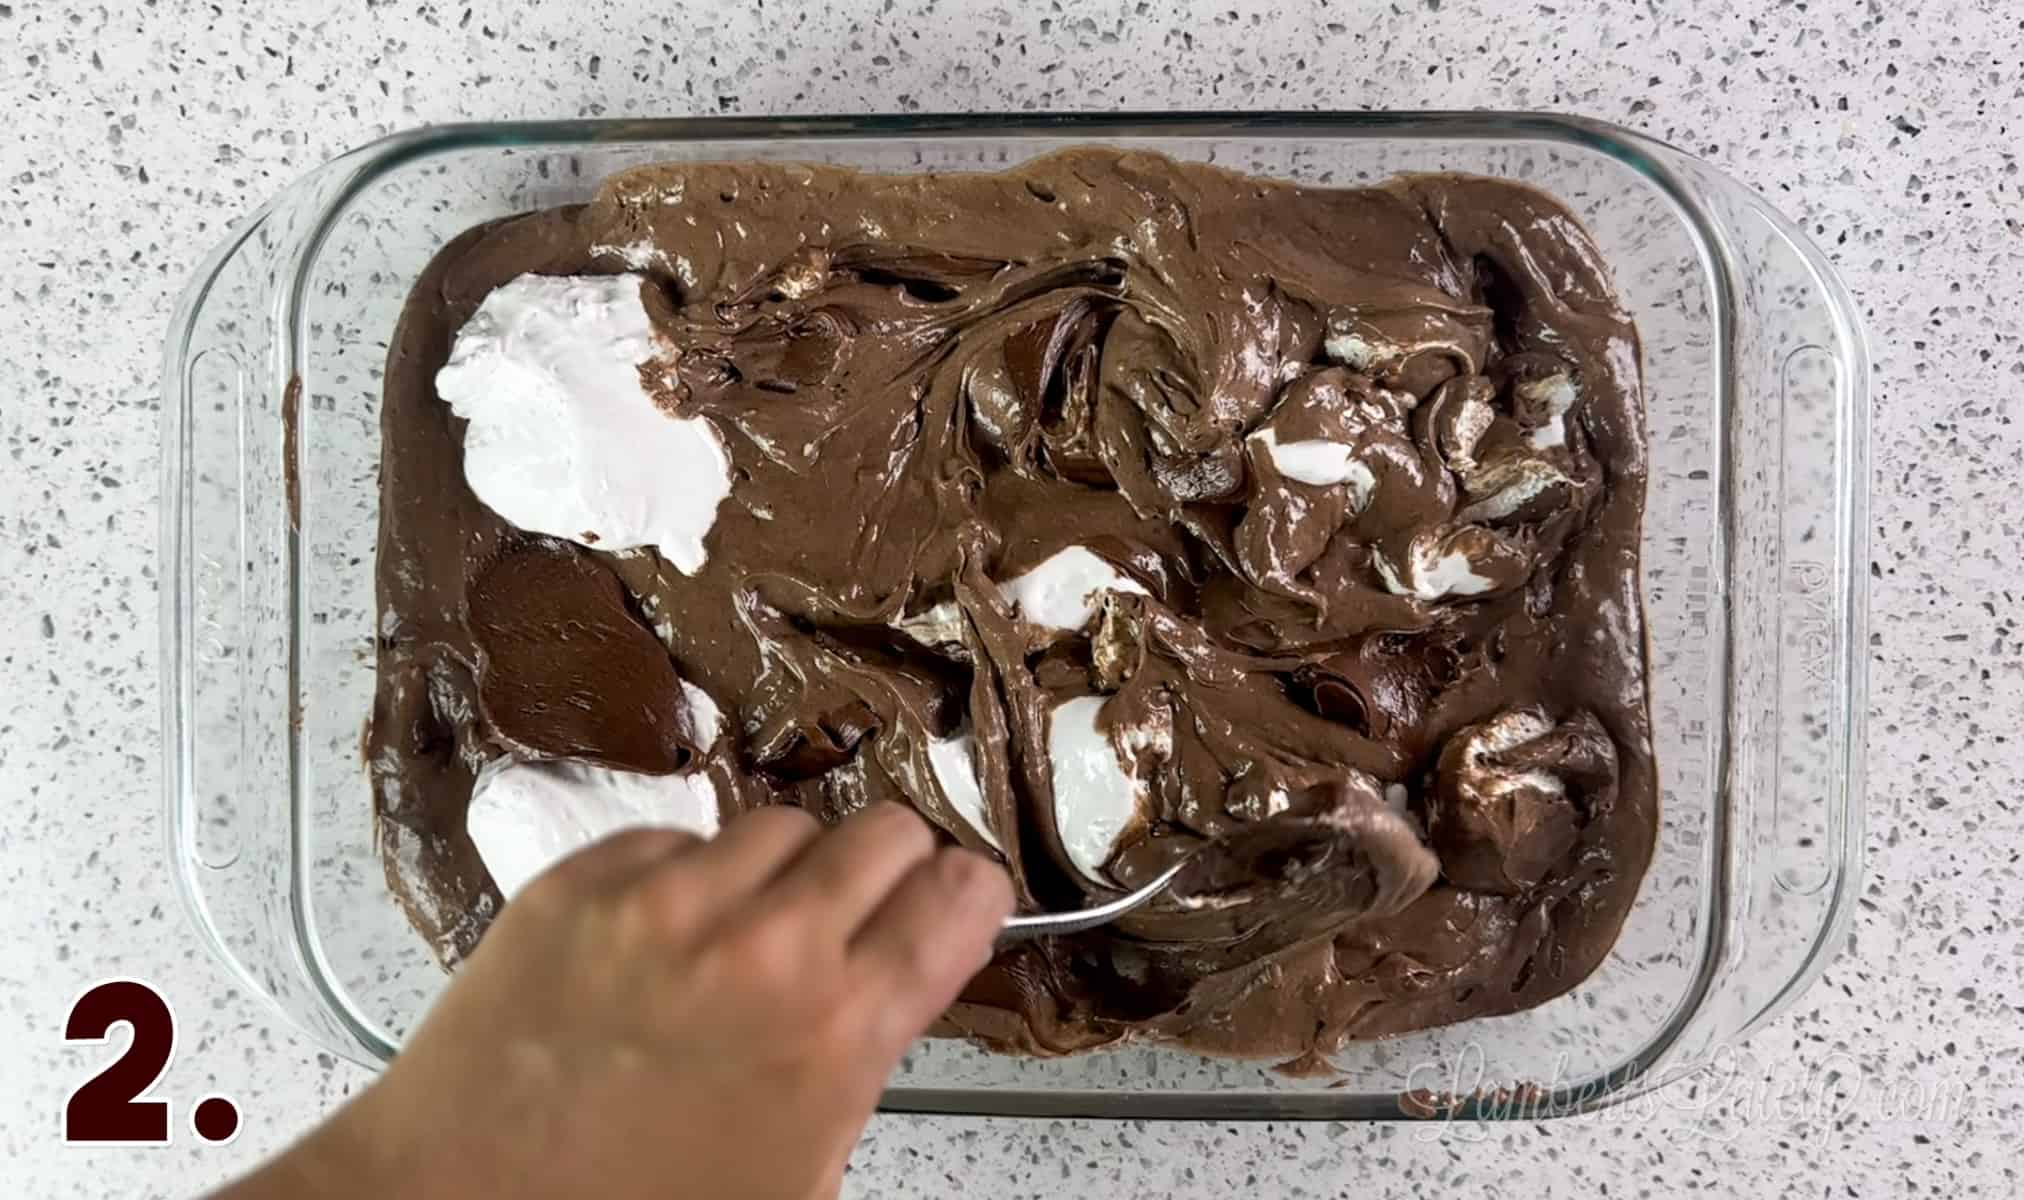 swirling marshmallow fluff and chocolate frosting into a cake batter.